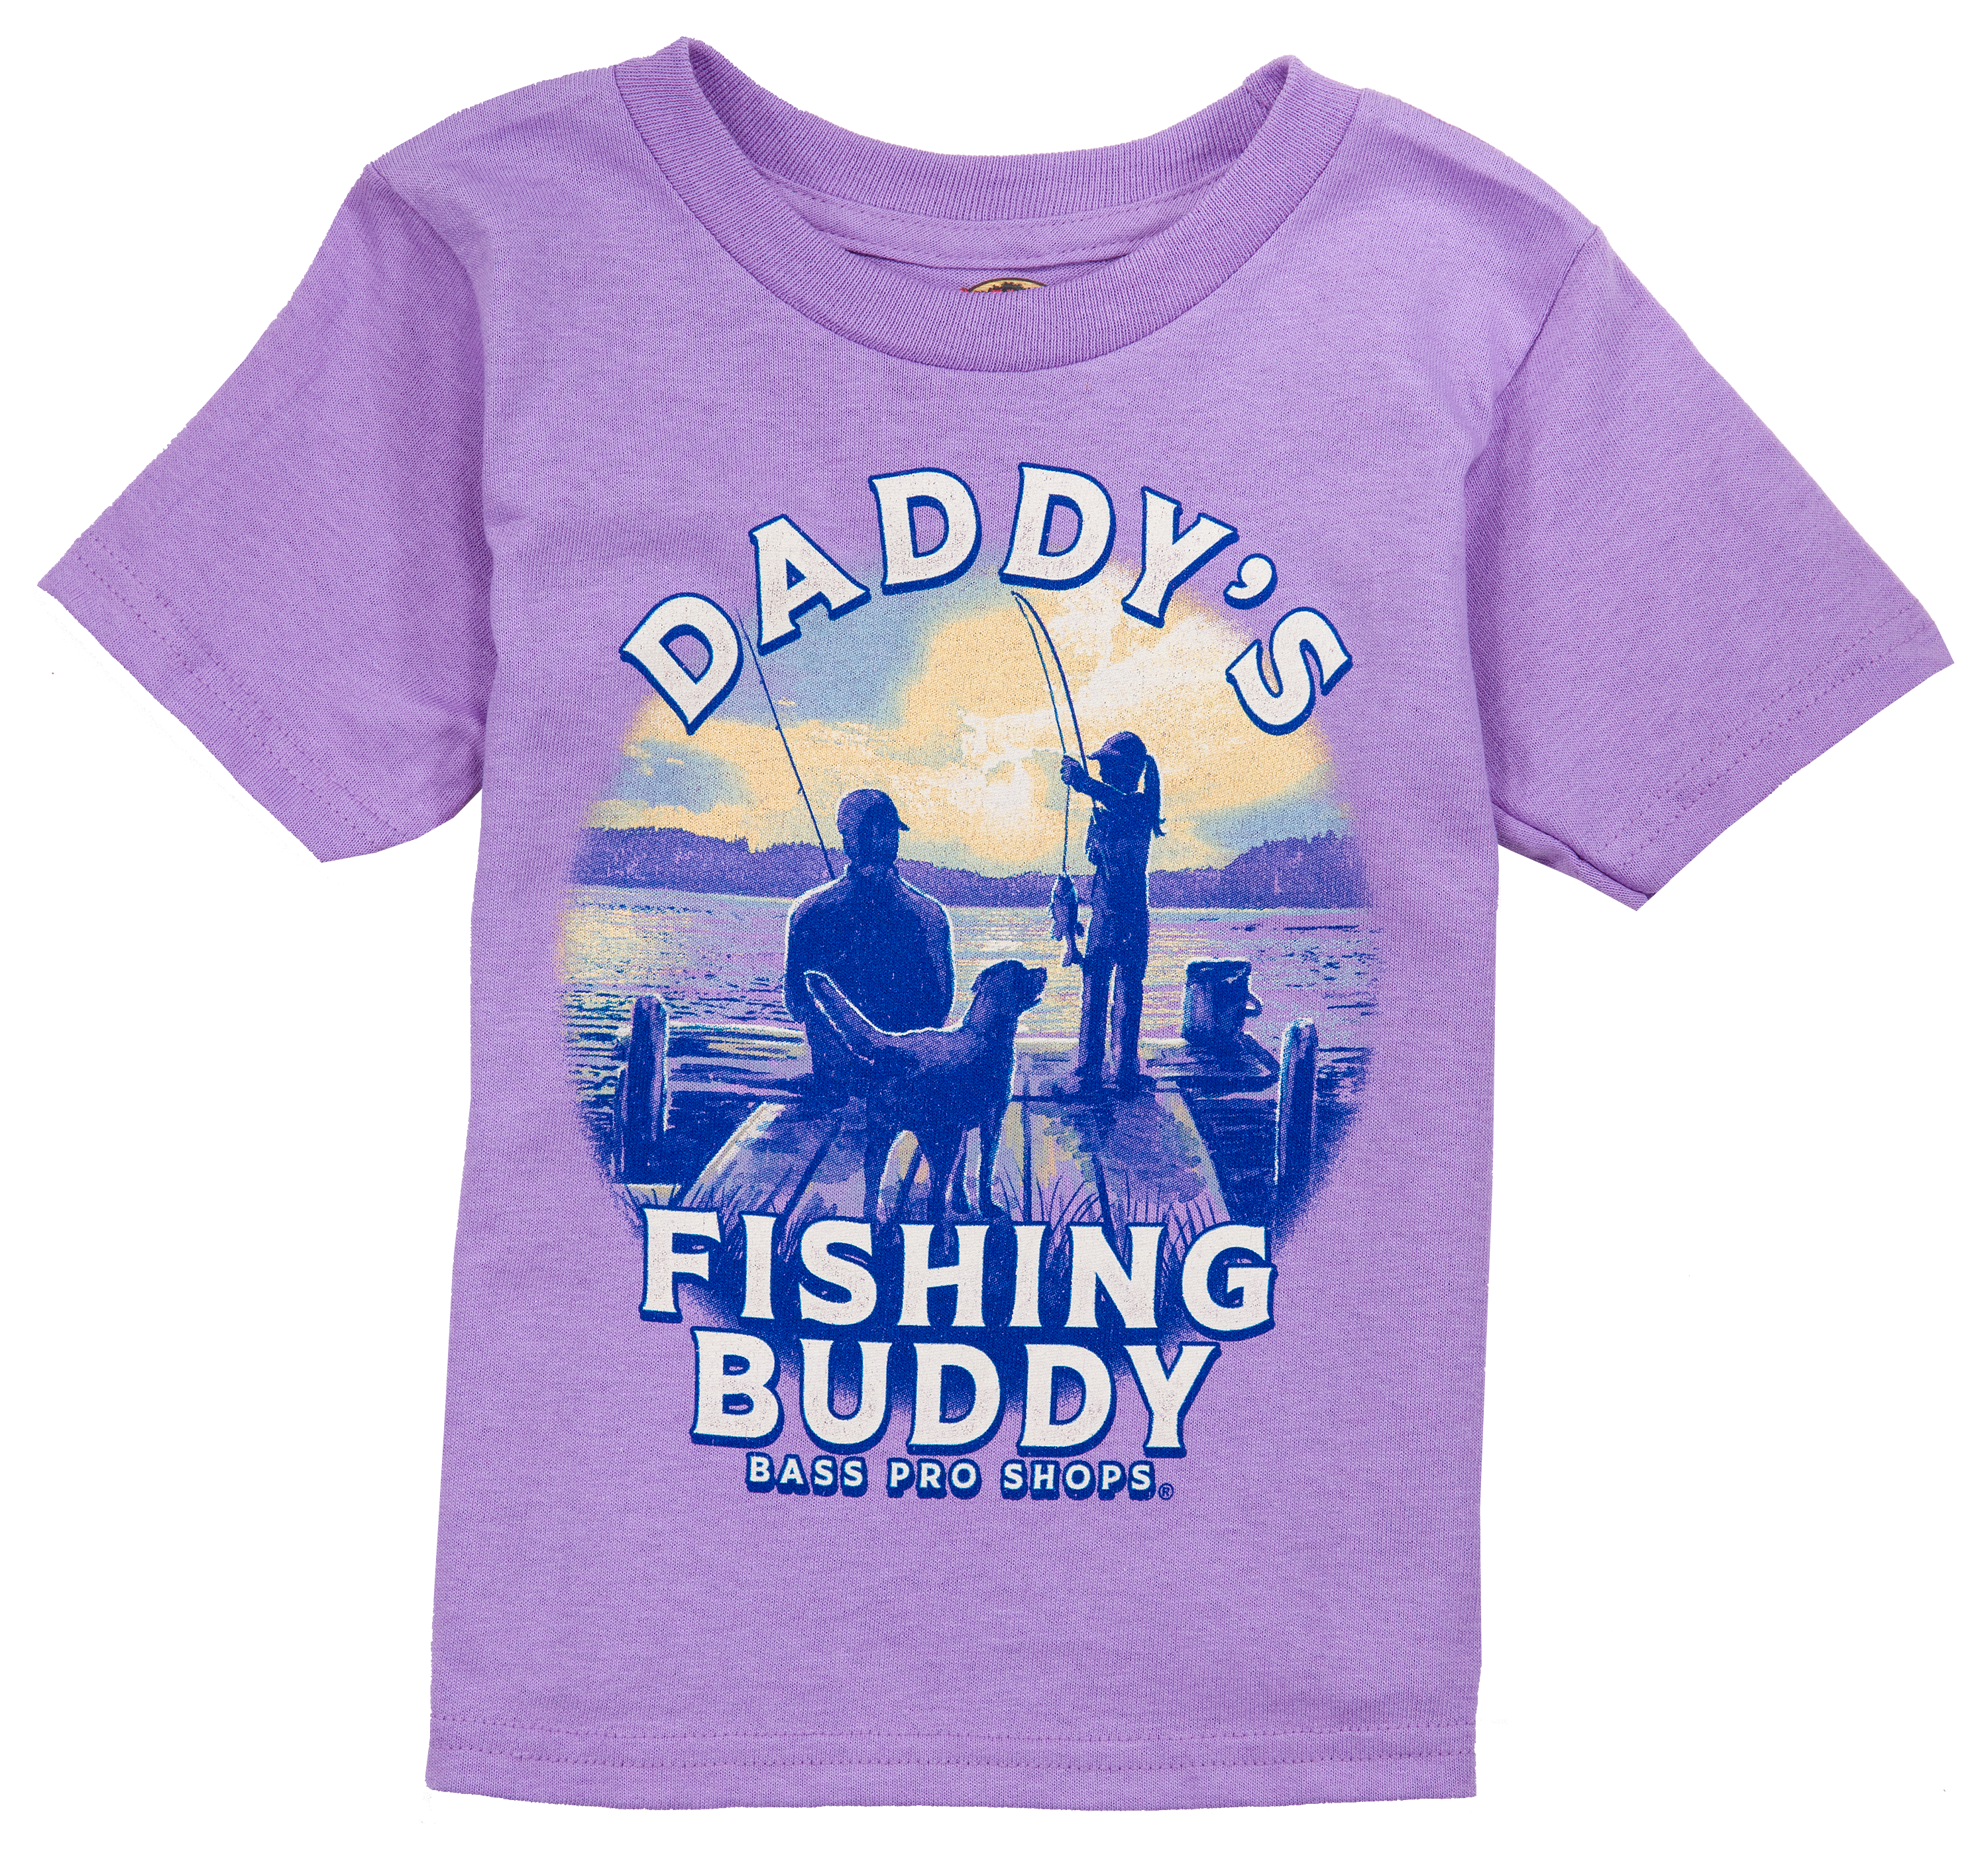 Bass Pro Shops Fishing Buddy Short-Sleeve T-Shirt for Toddlers or